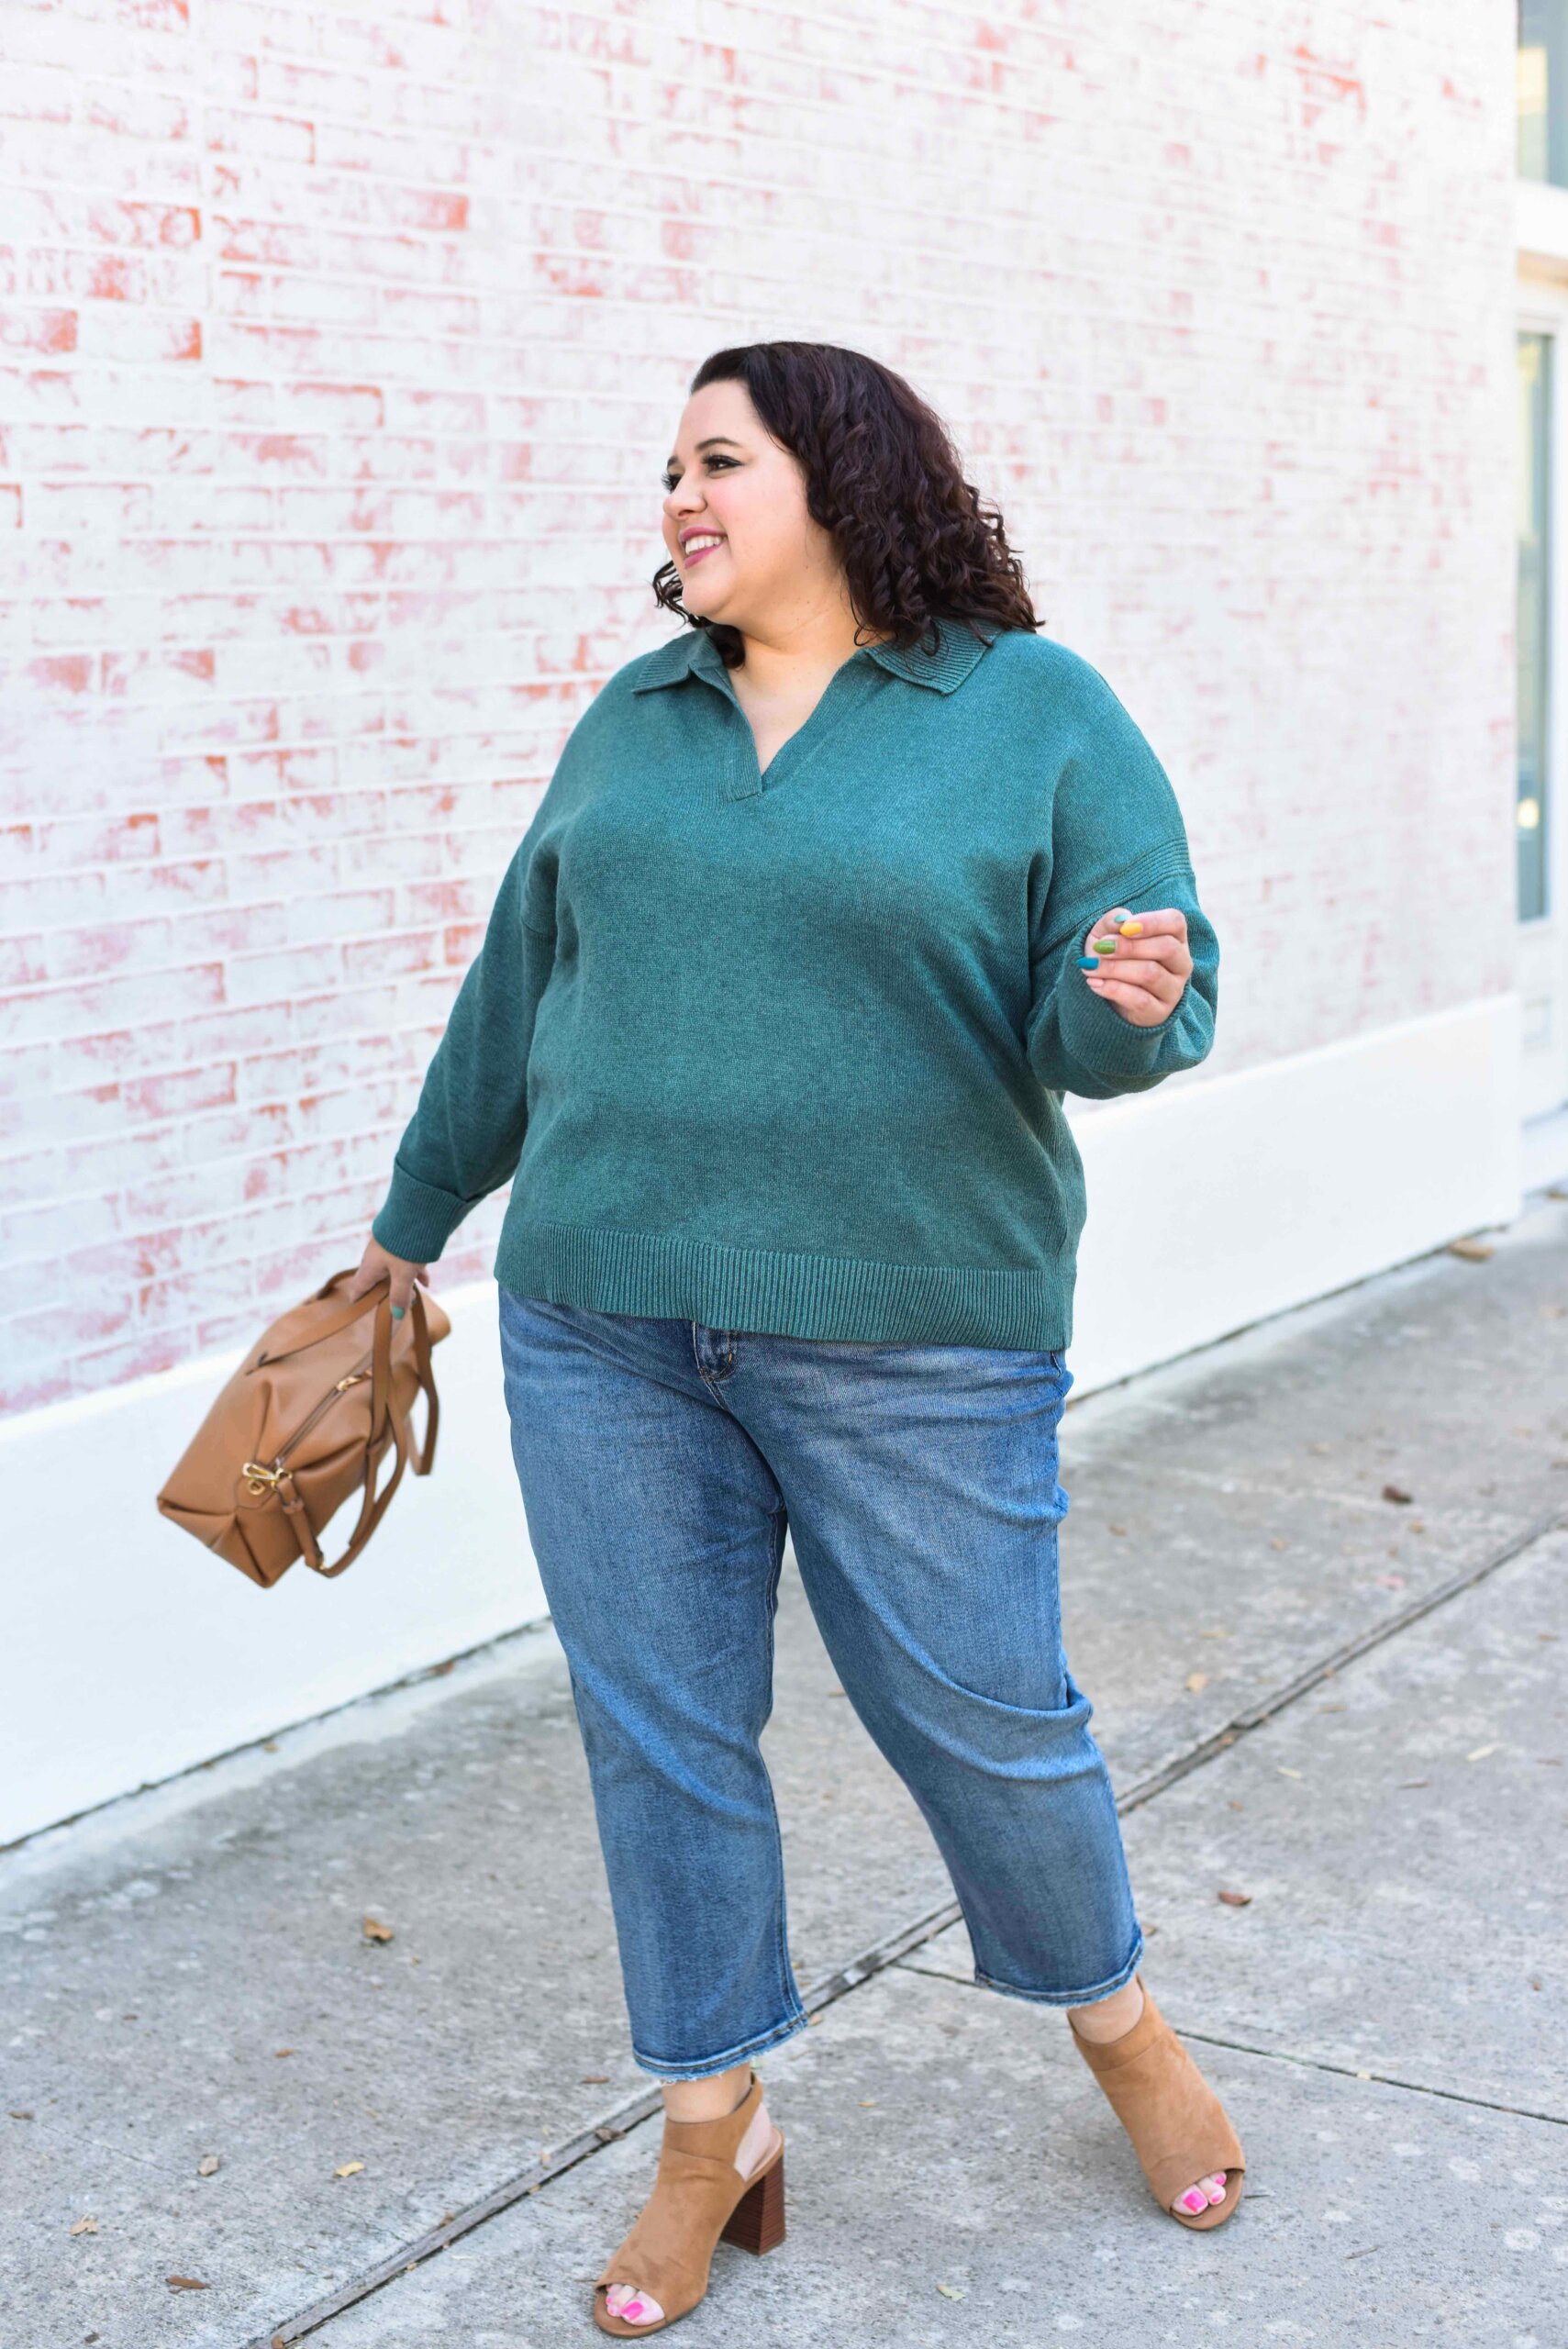 Plus Size Target Style 